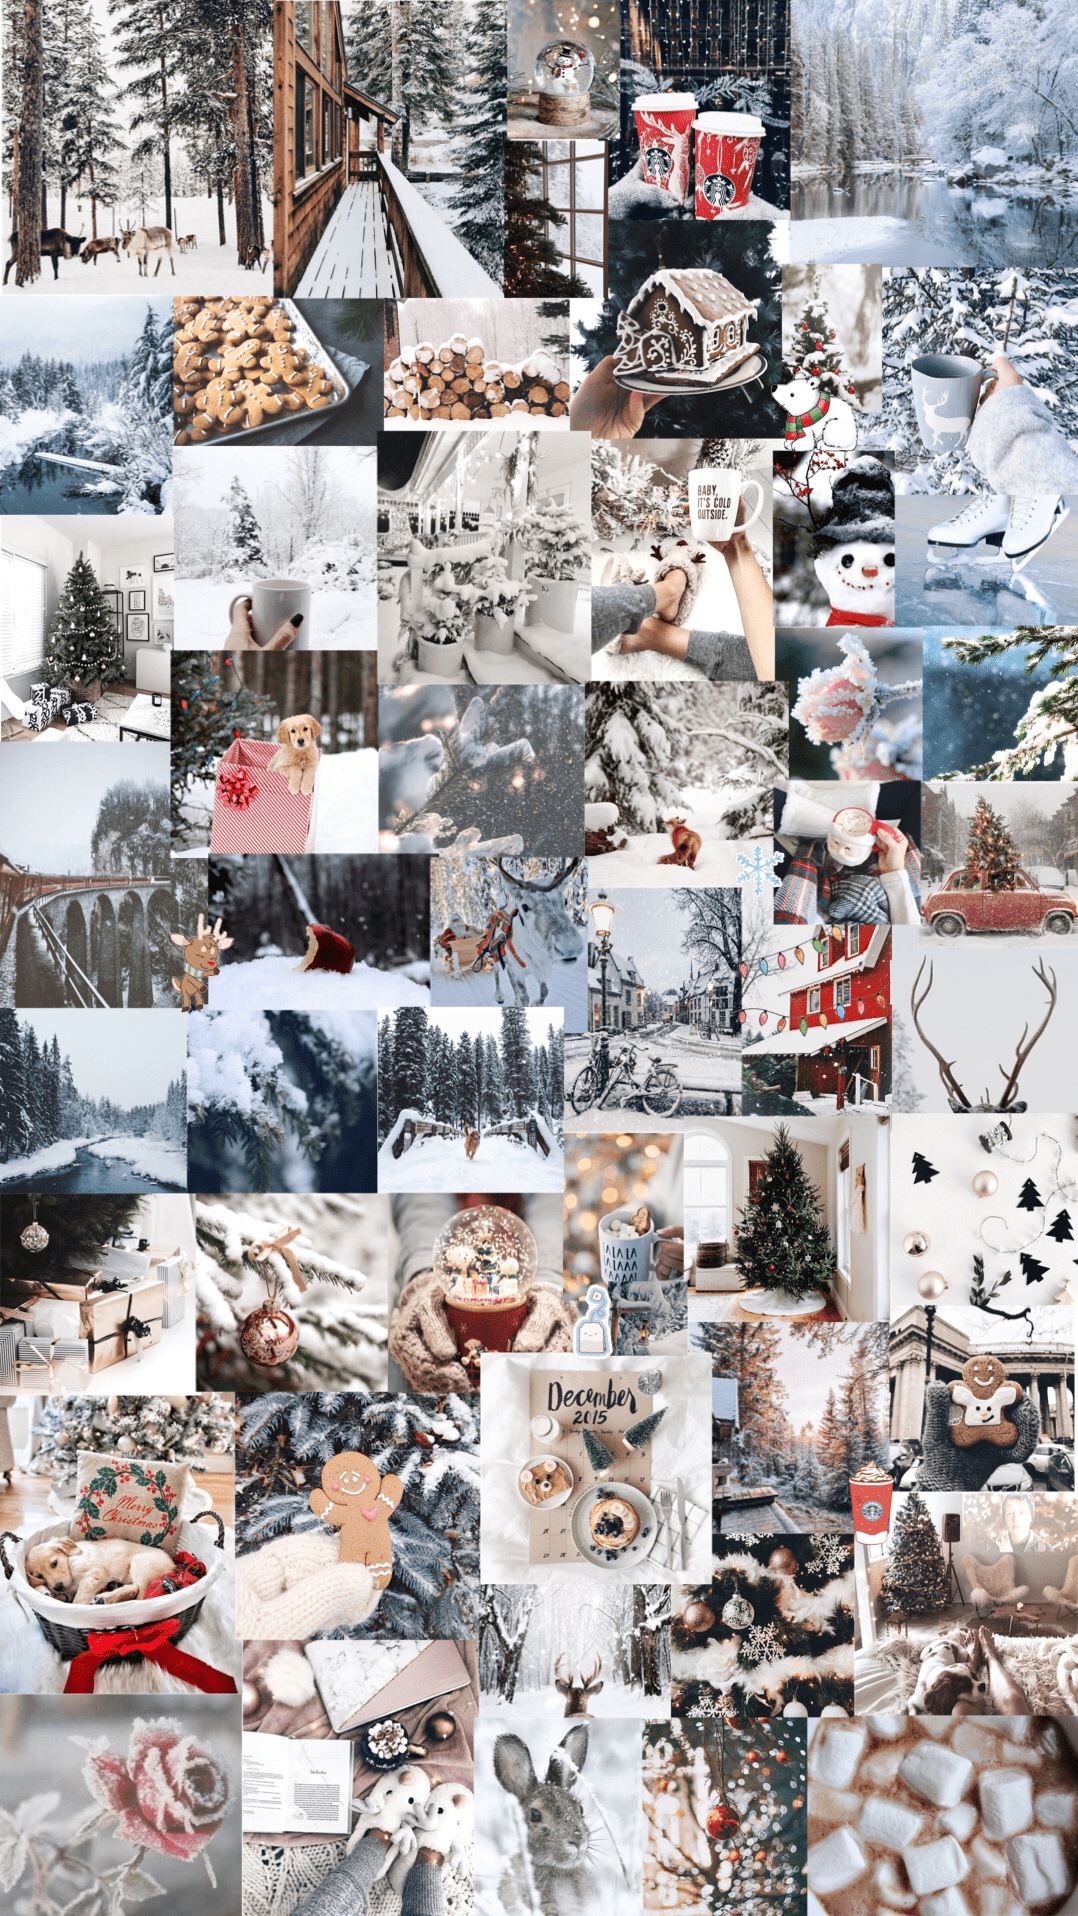 A collage of pictures with snow in them - December, collage, snow, winter